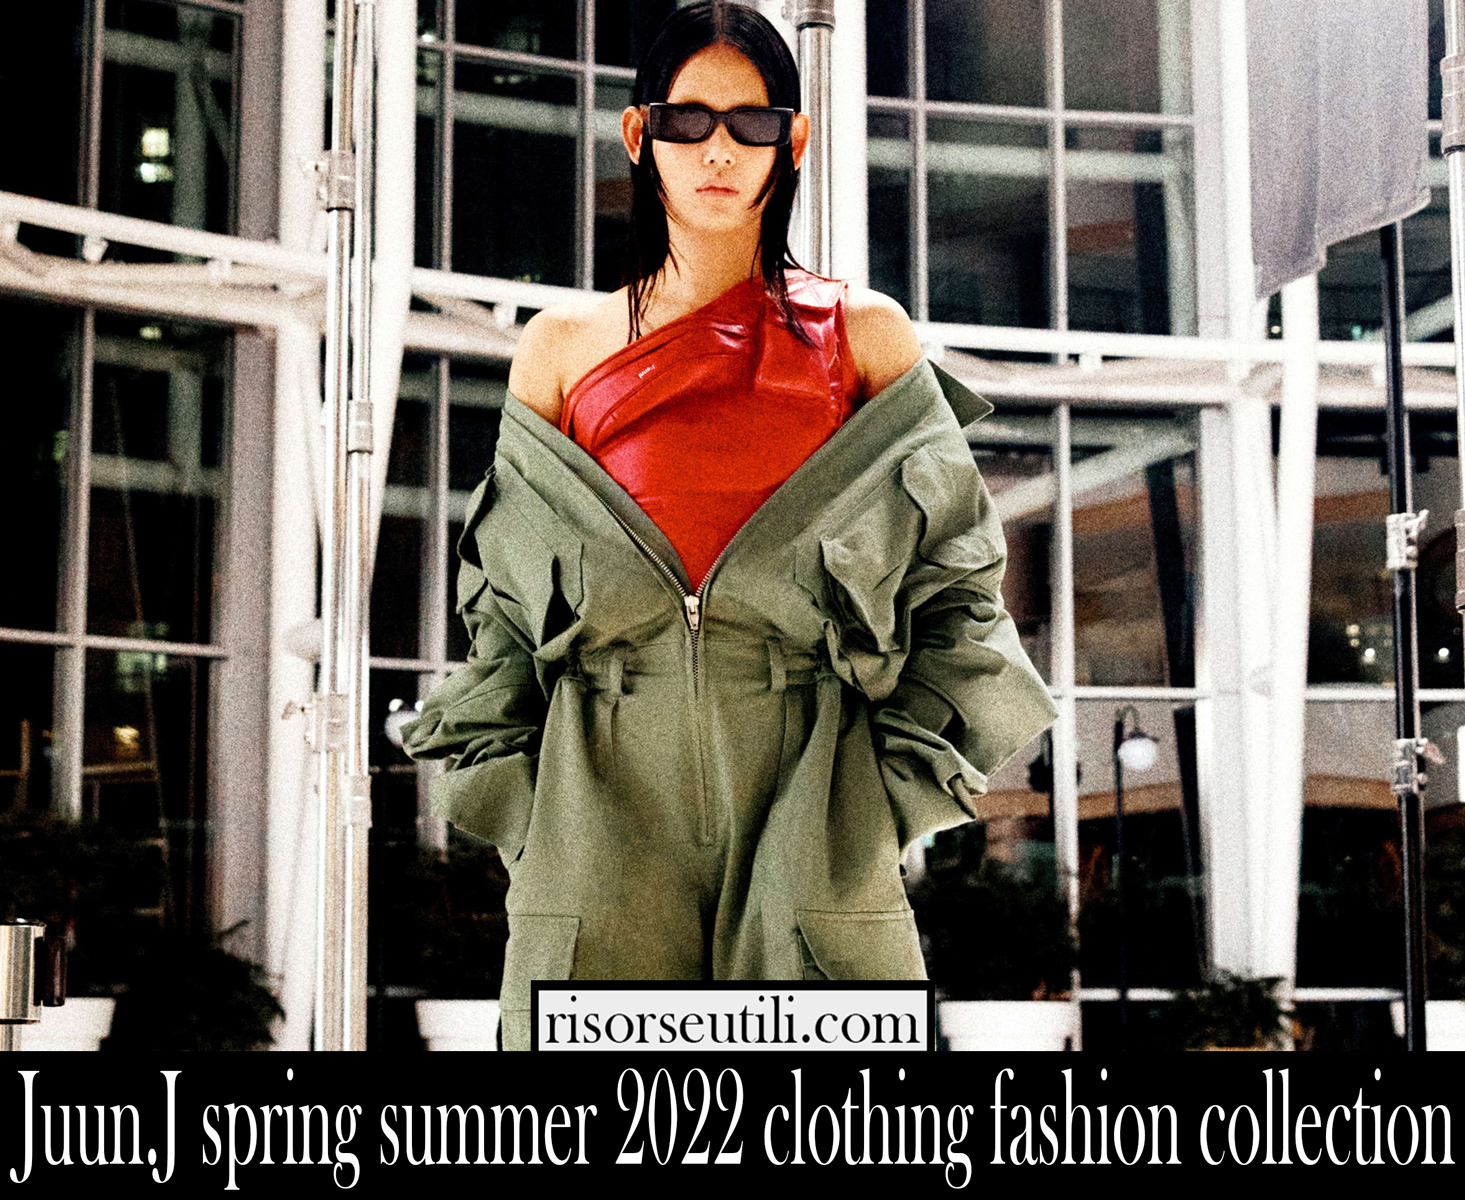 Juun.J spring summer 2022 clothing fashion collection